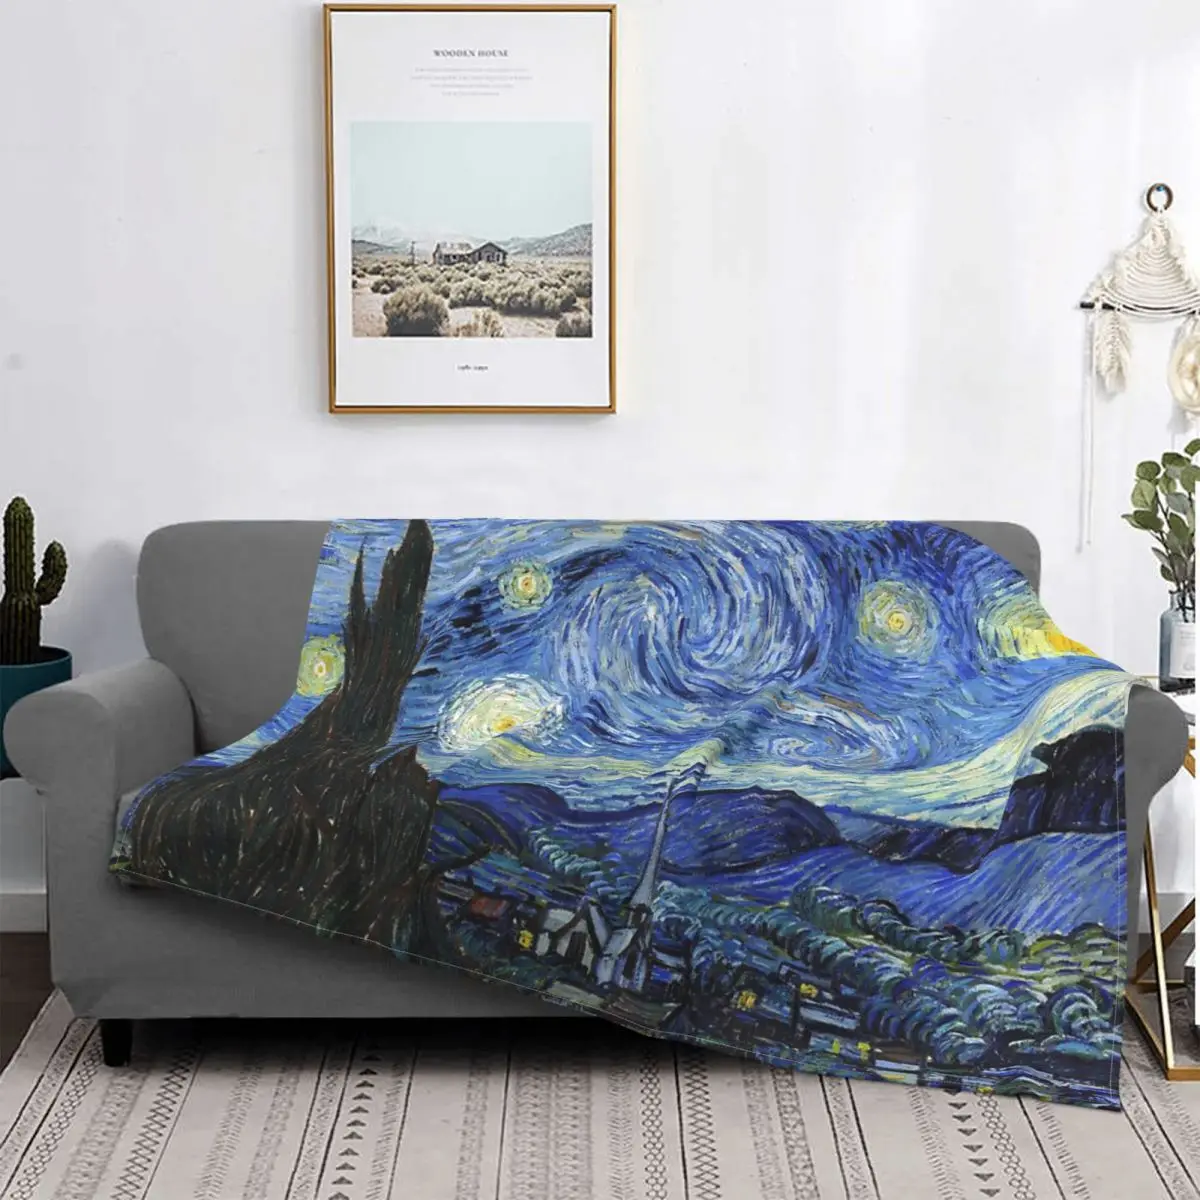 

Blanket The Starry Night By Vincent Van Gogh, Art Print Throw Blanket Lightweight Cozy for Sofa Chair Bed Office Adult Kids Gift